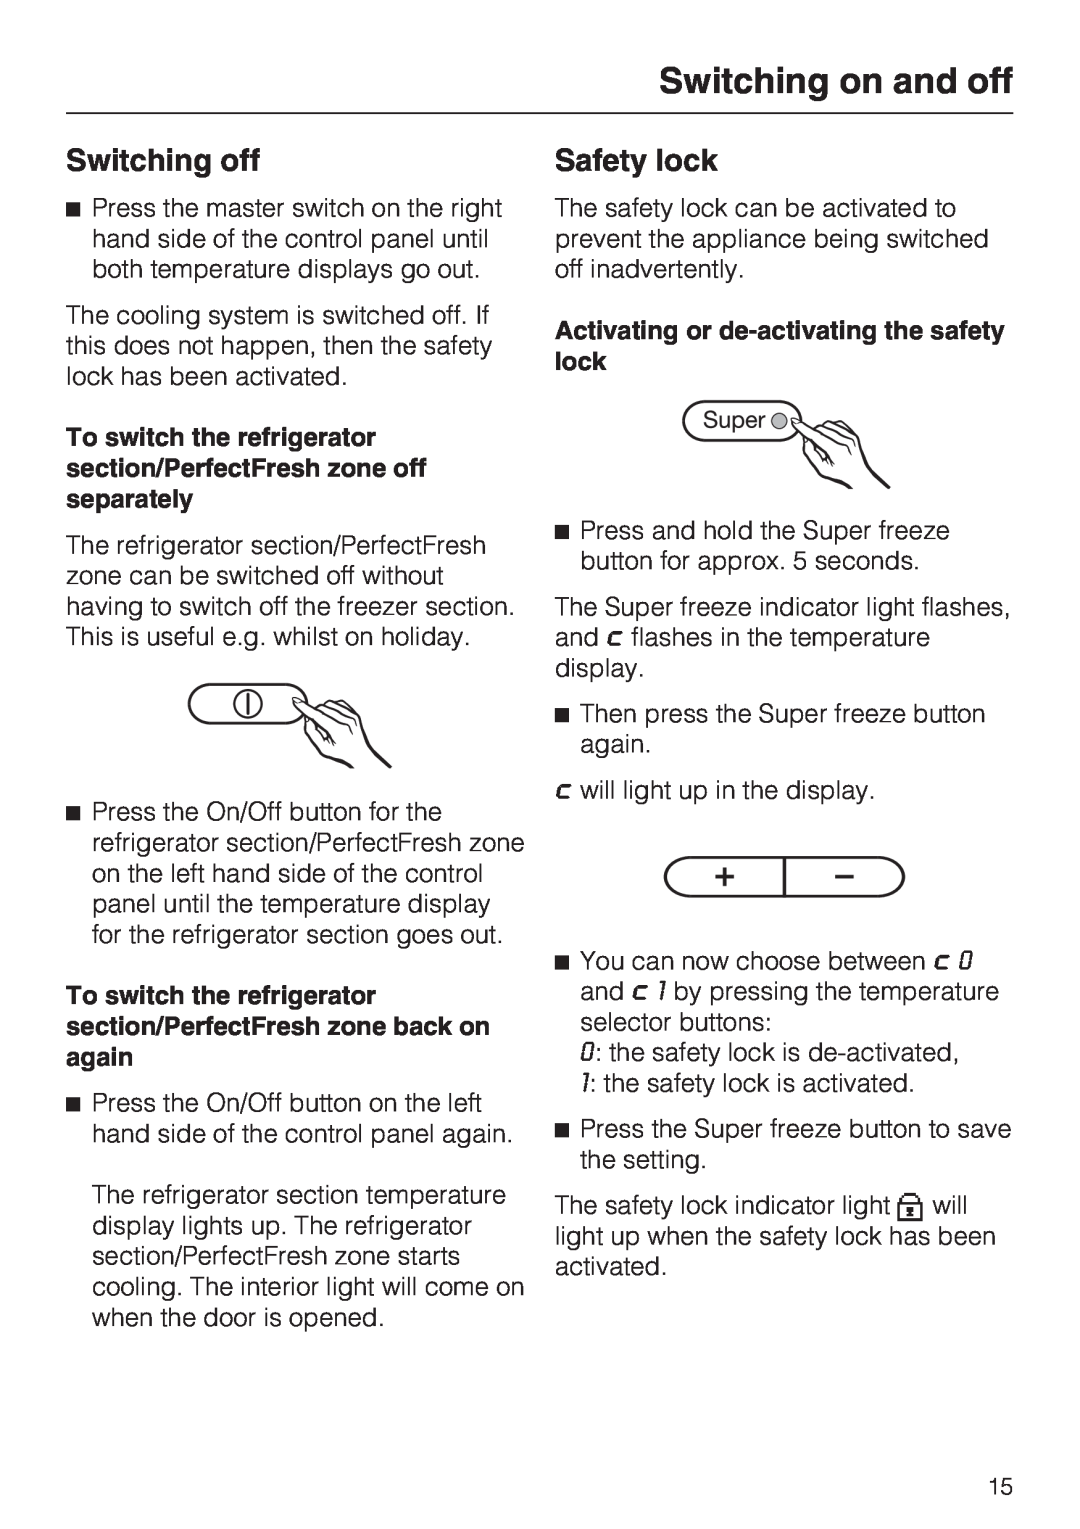 Miele KF 9757 ID installation instructions Switching off, Safety lock, Switching on and off 